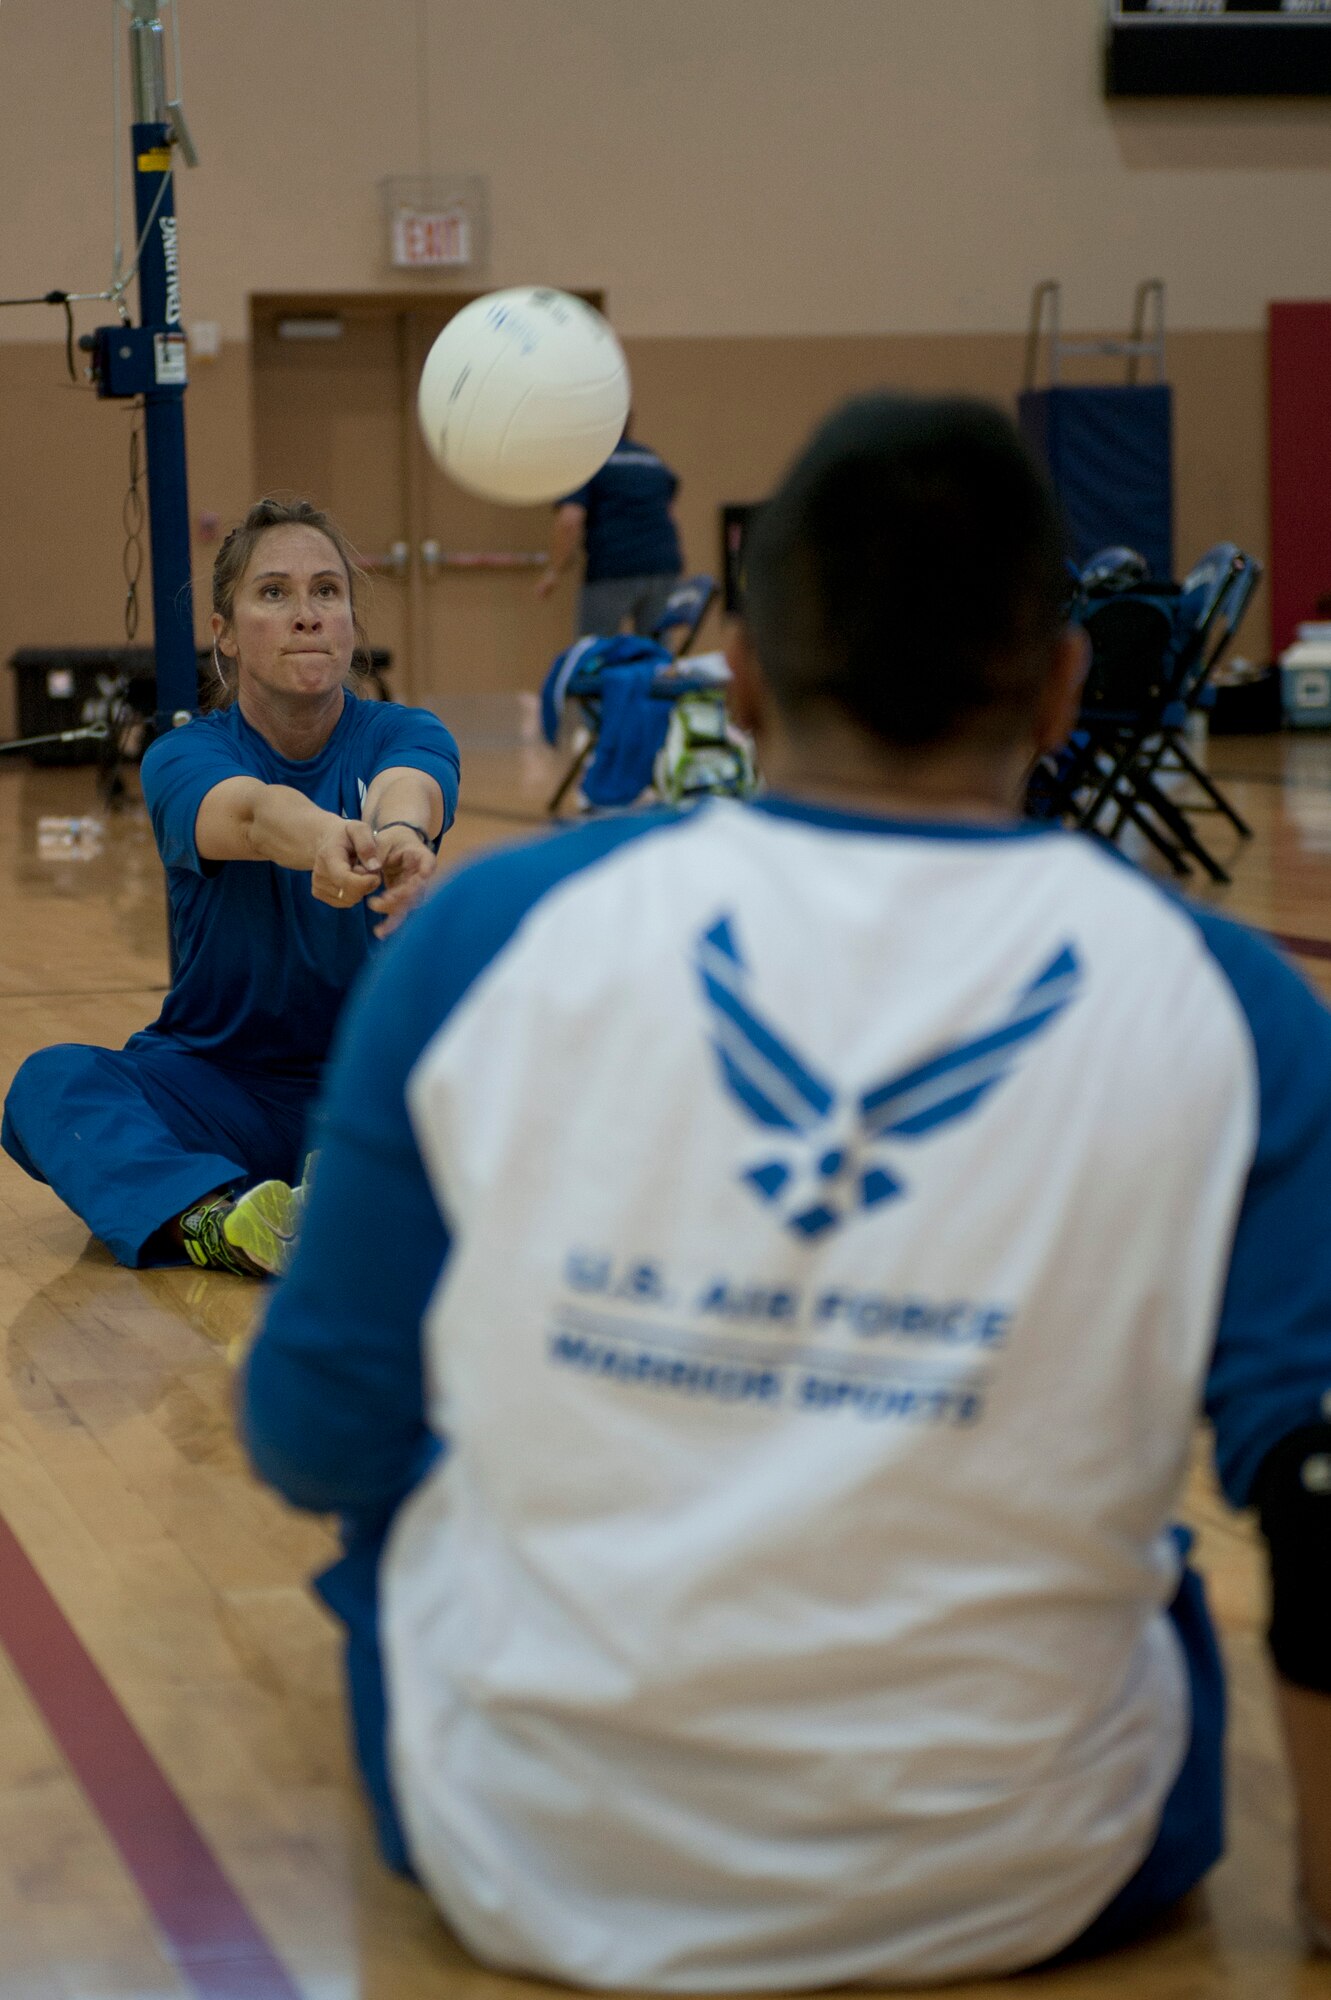 Angie Blue (left) and Steve Rasavongsy, 2015 U.S. Air Force Trials volleyball team members, practice hitting a volleyball at Nellis Air Force Base, Nev., March 2, 2015. More than 100 wounded, ill or injured service men and women from around the country will compete for a spot on the 2015 U.S. Air Force Wounded Warrior Team which will represent the Air Force at adaptive sports events throughout the year. (U.S Air Force photo by Senior Airman Timothy Young) 